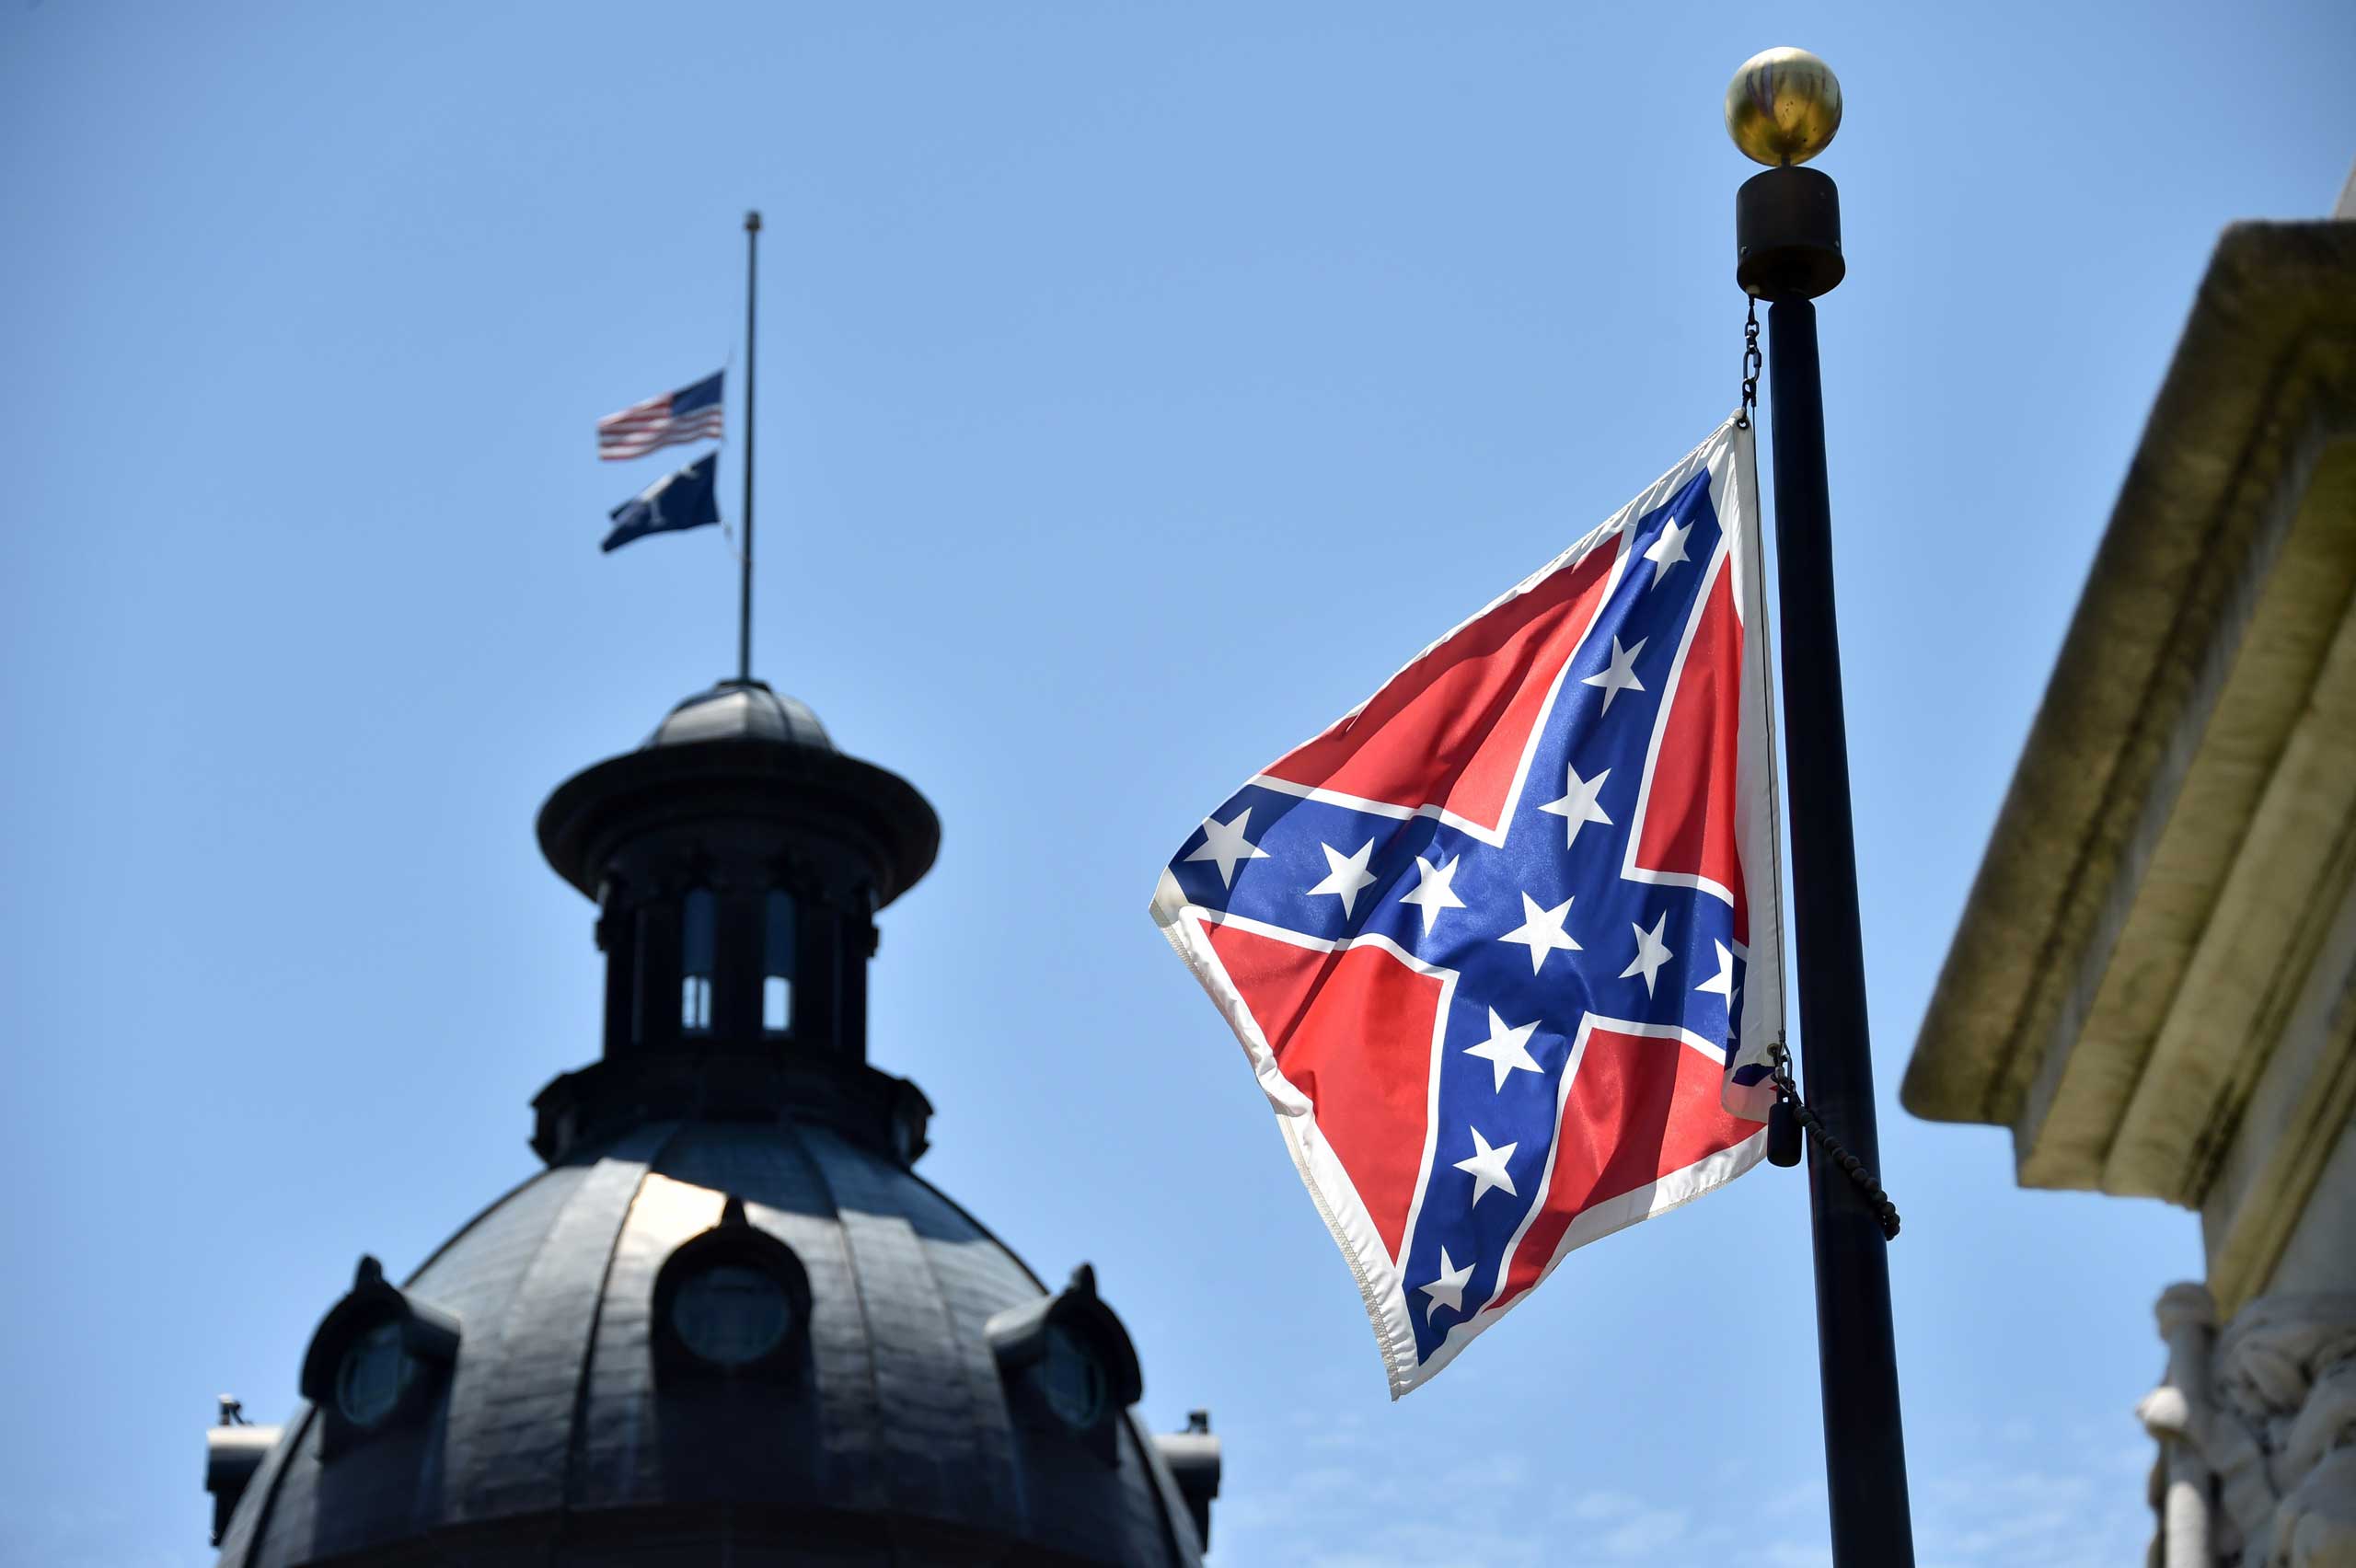 The South Carolina and American flags flying at half-staff behind the Confederate flag erected in front of the State Congress building in Columbia, South Carolina on June 19, 2015. (Mladen Antonov — AFP/Getty Images)